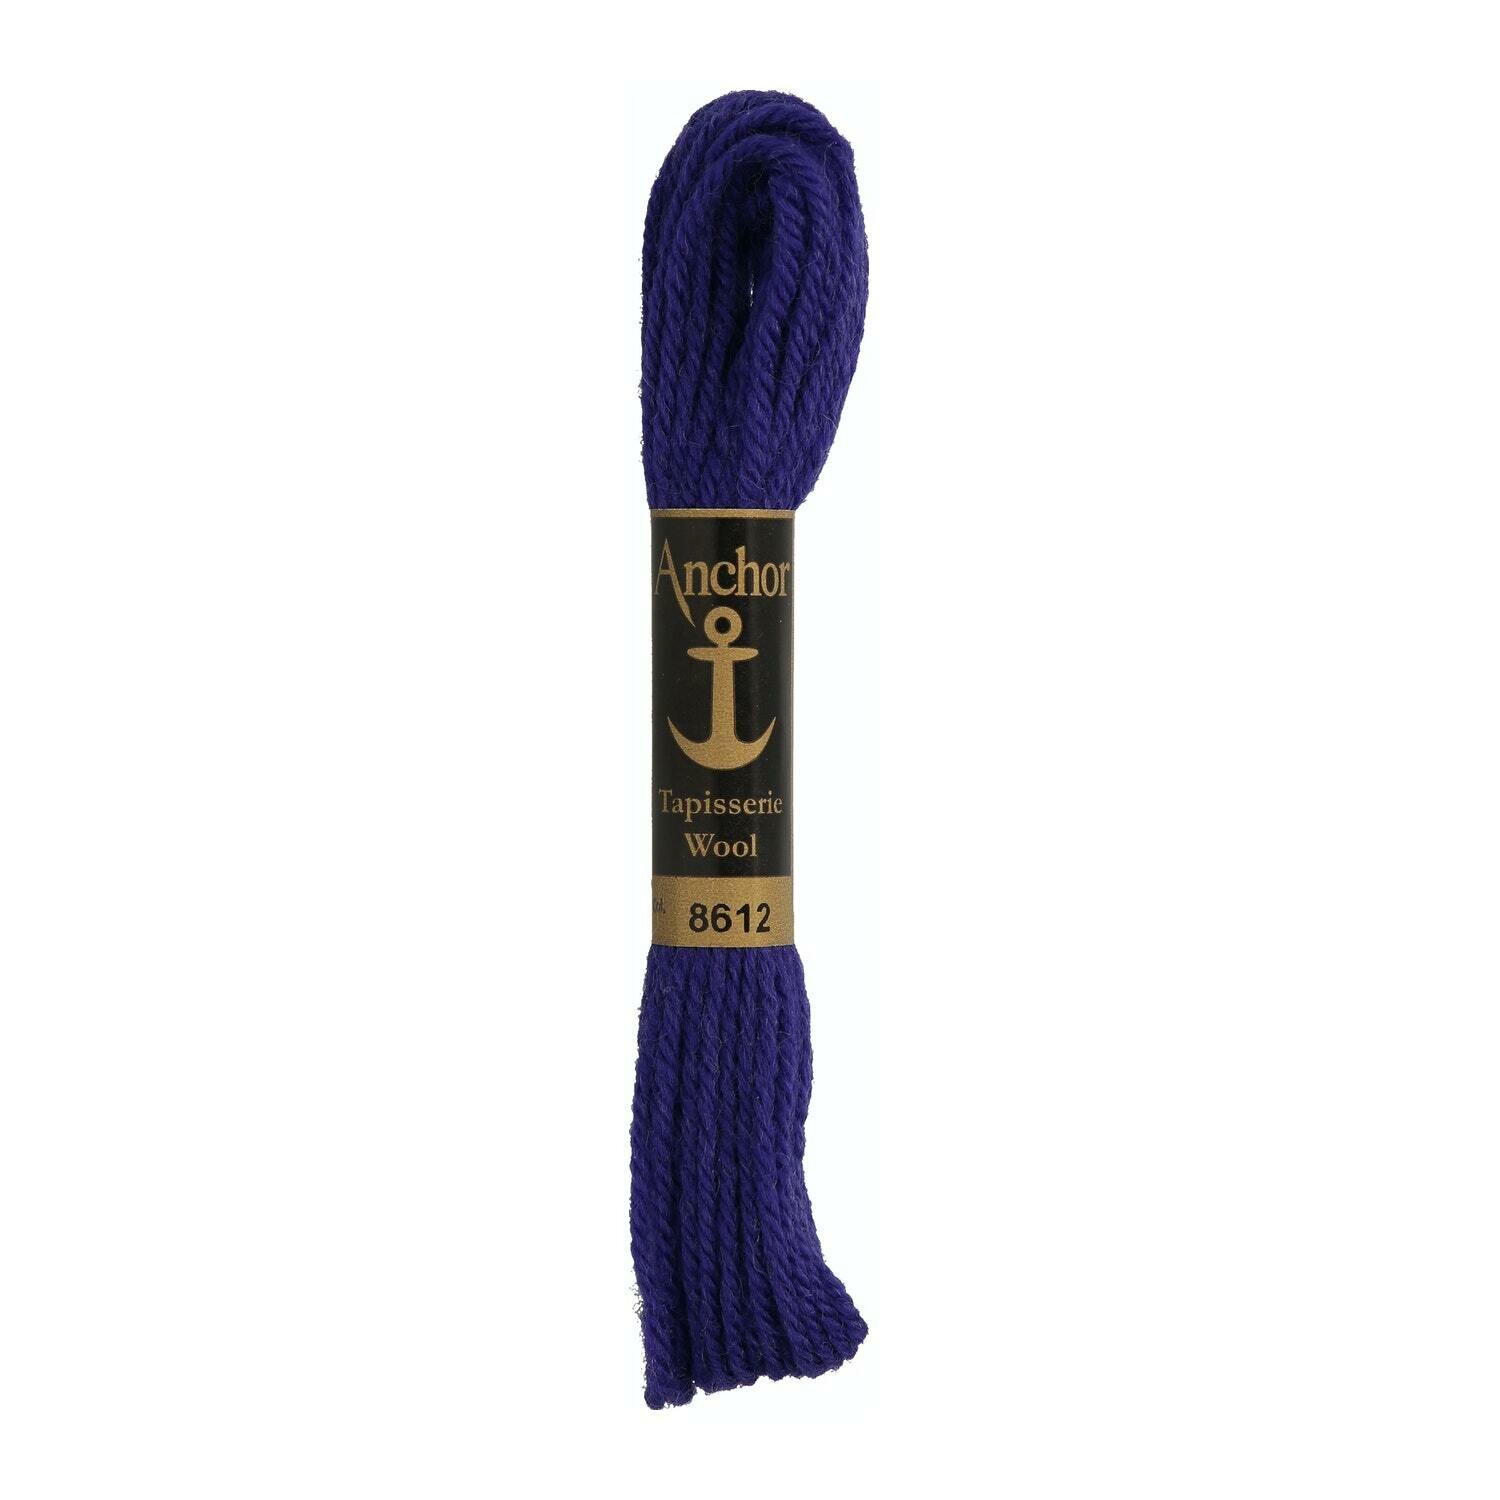 Anchor Tapisserie Wool #  08612